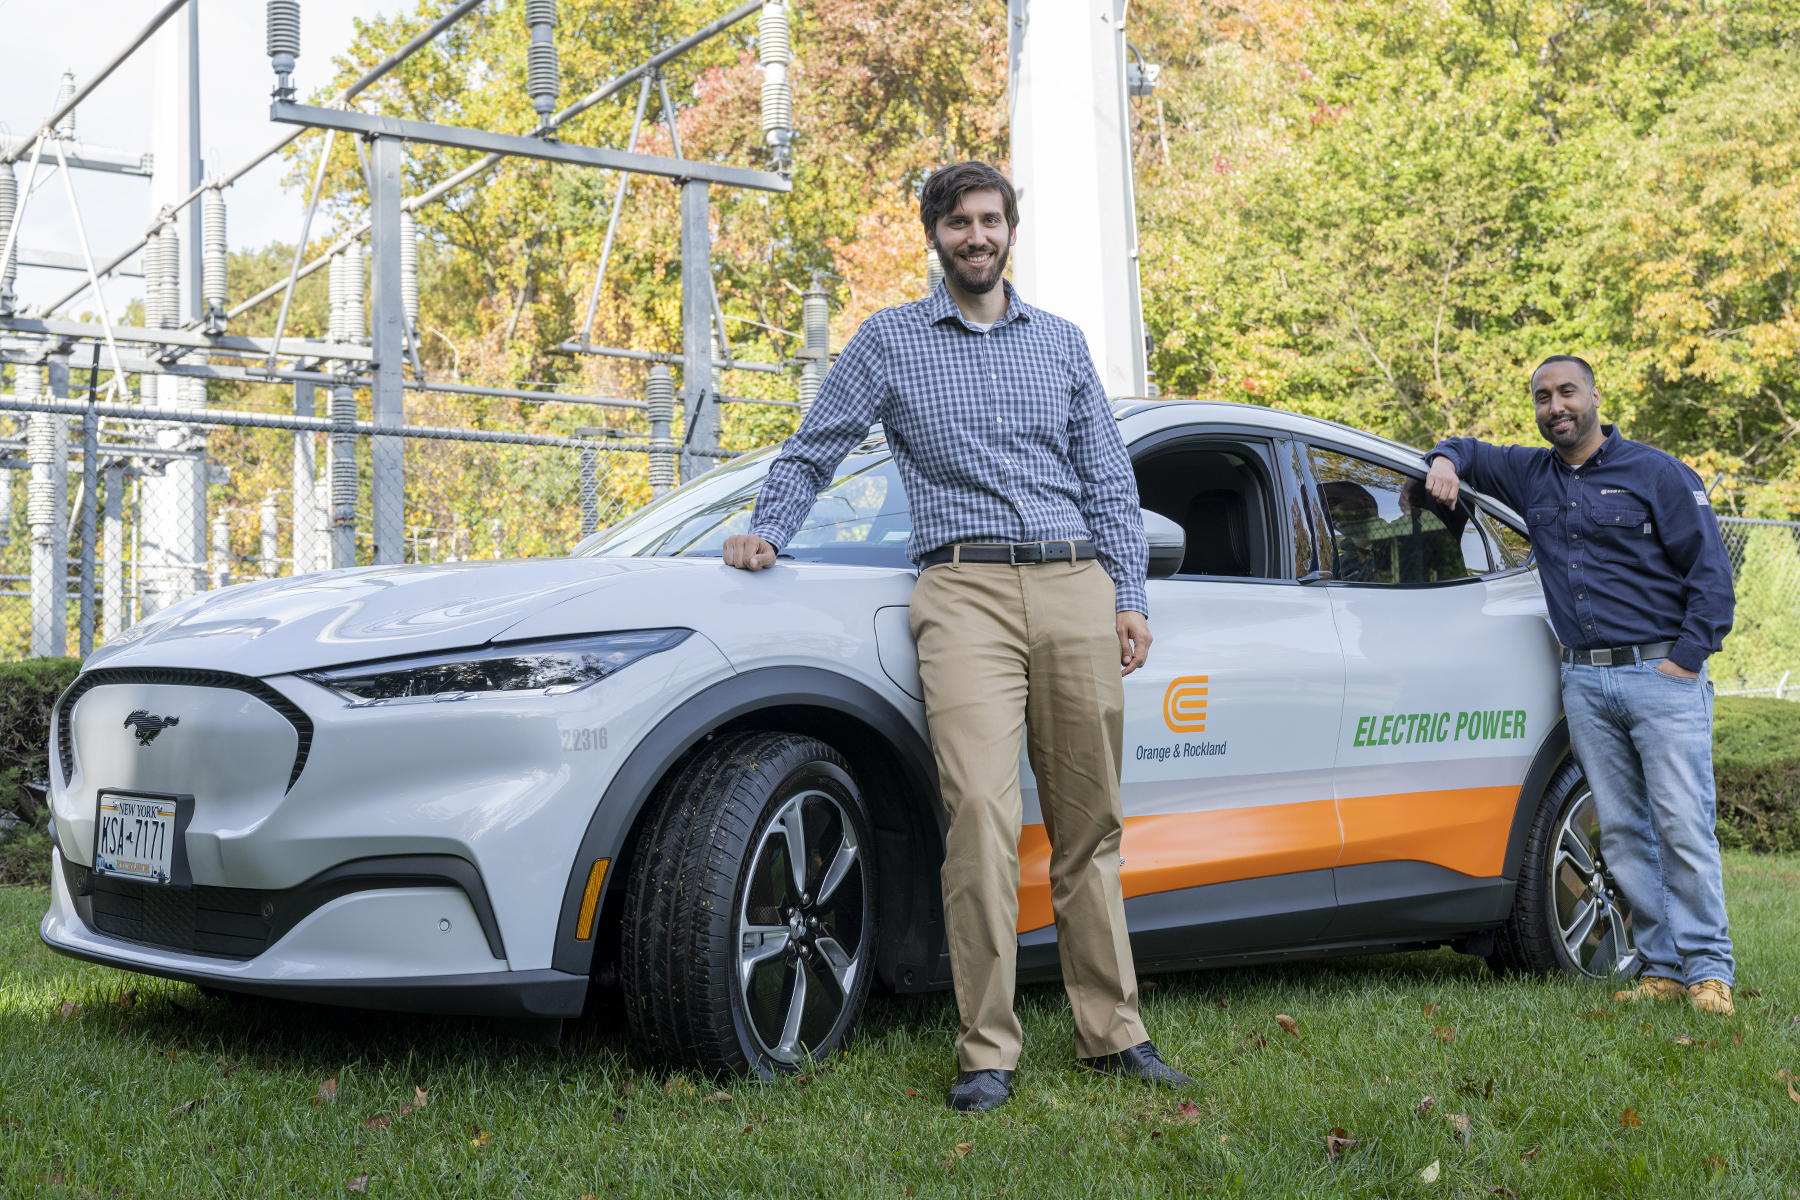 Two O&R employees standing in front of electric vehicle Mustang Mach-E